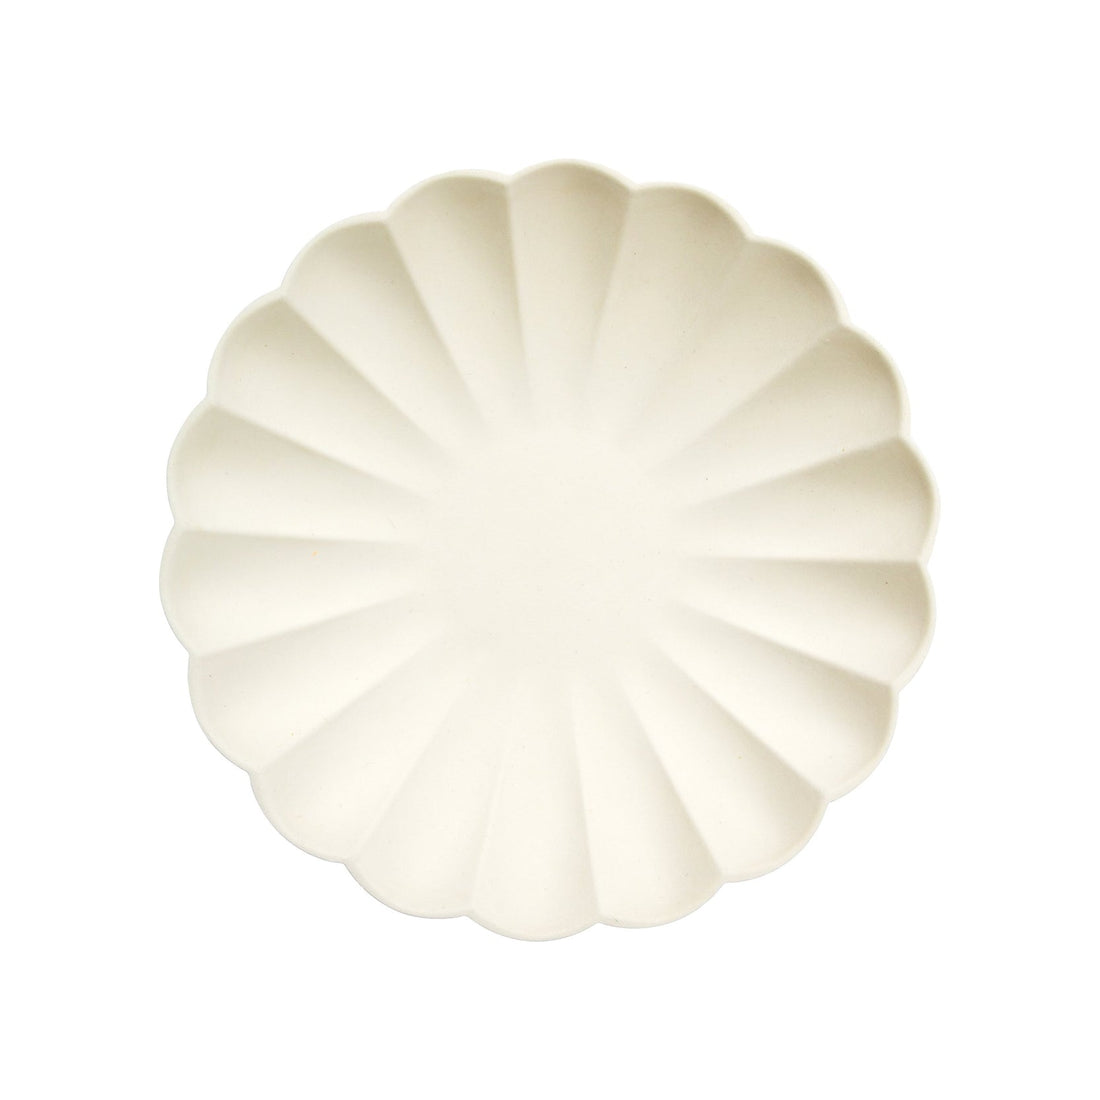 A Meri Meri cream eco plate made with natural materials, featuring a delicate flower pattern.